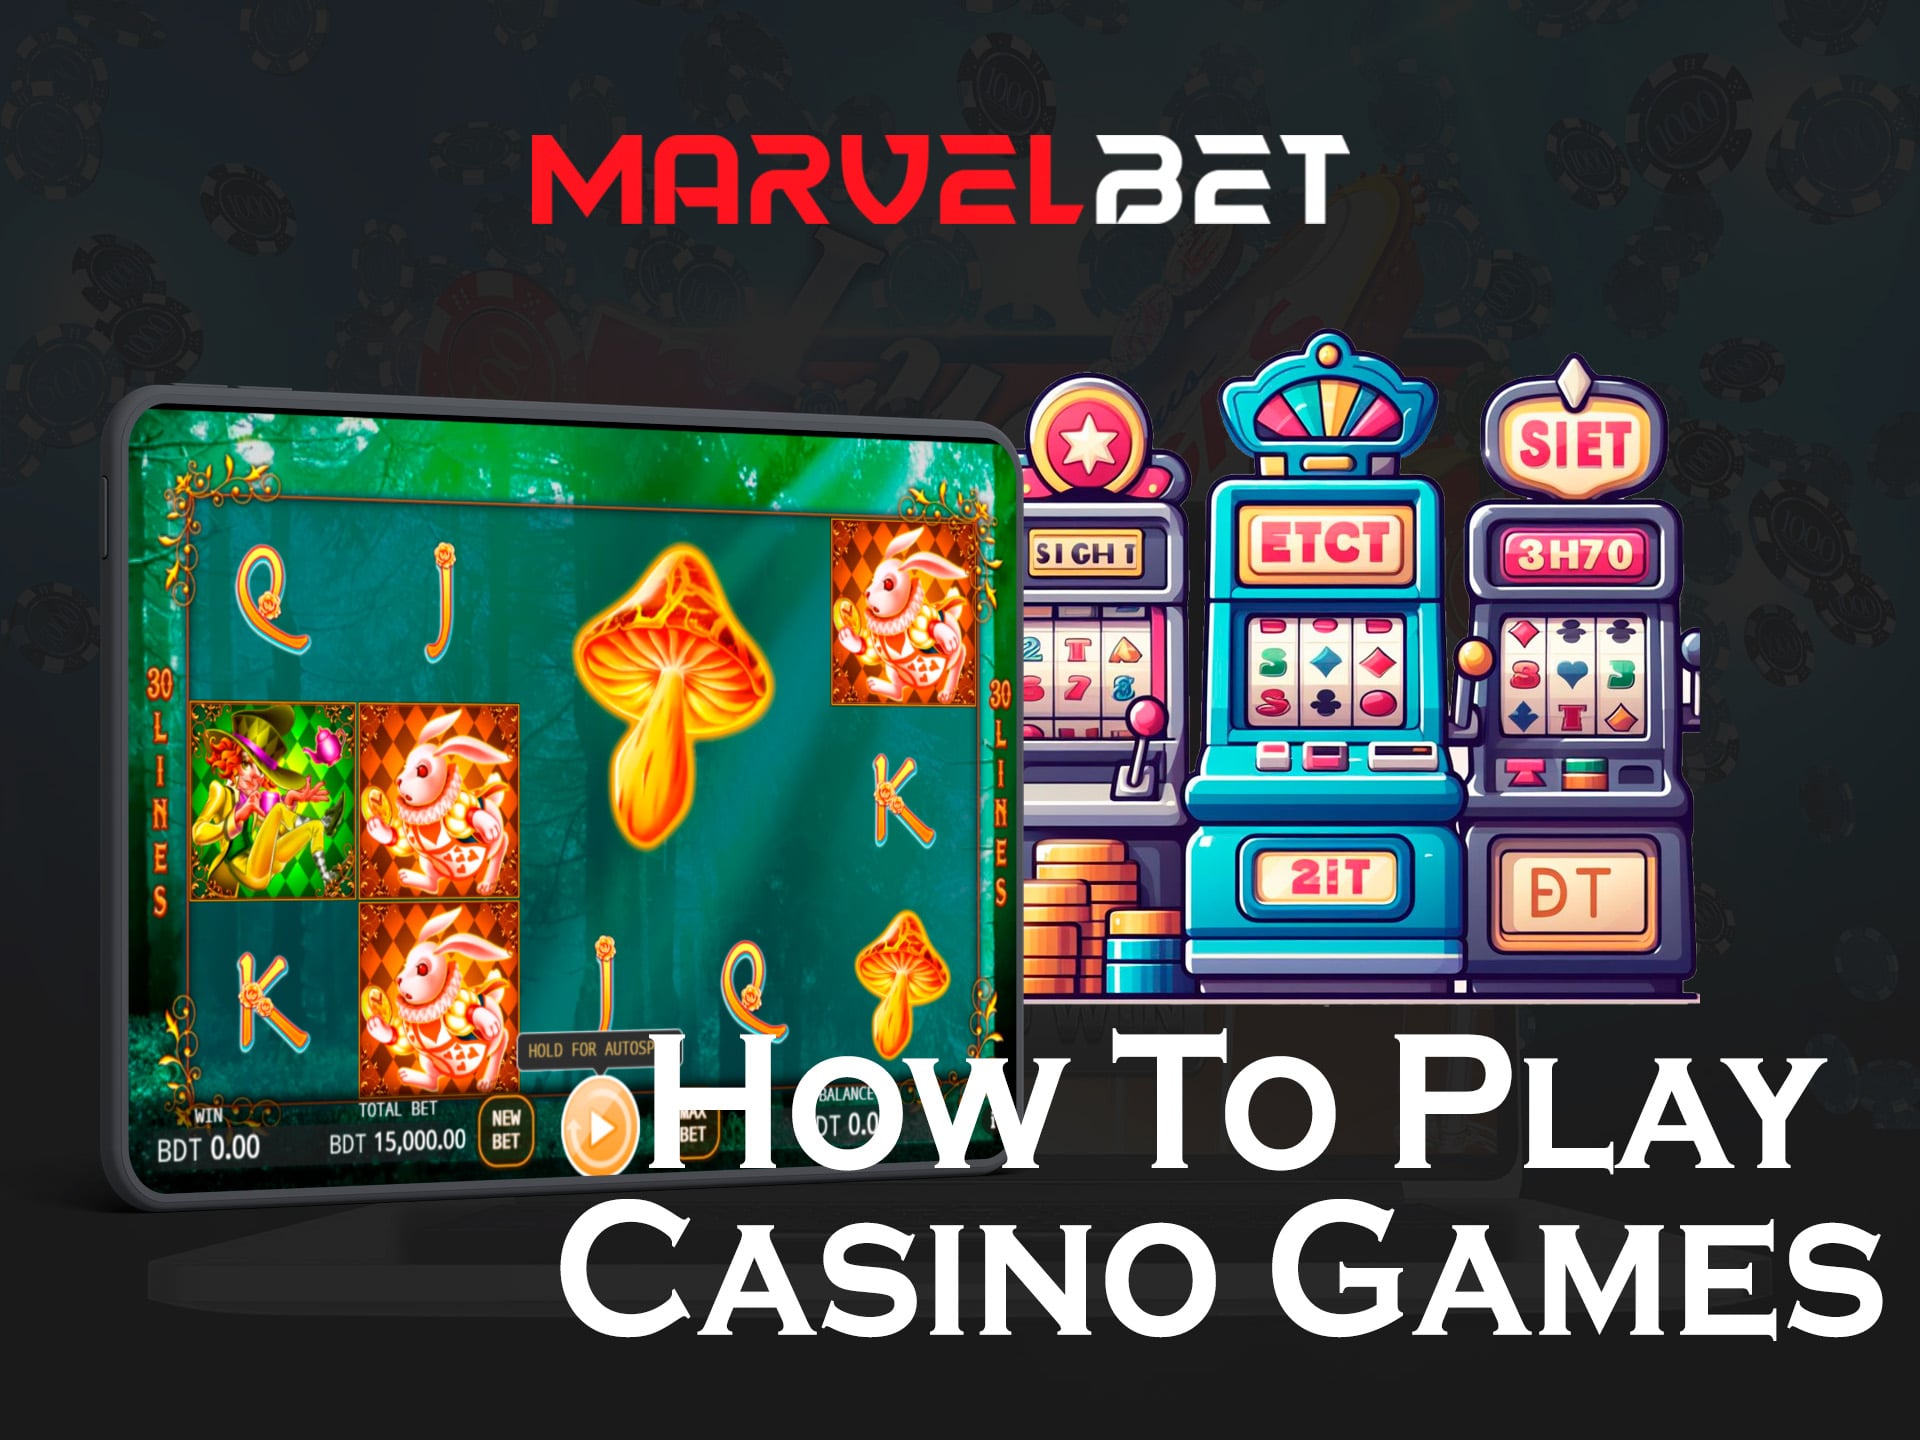 learn online casino games at marvelbet